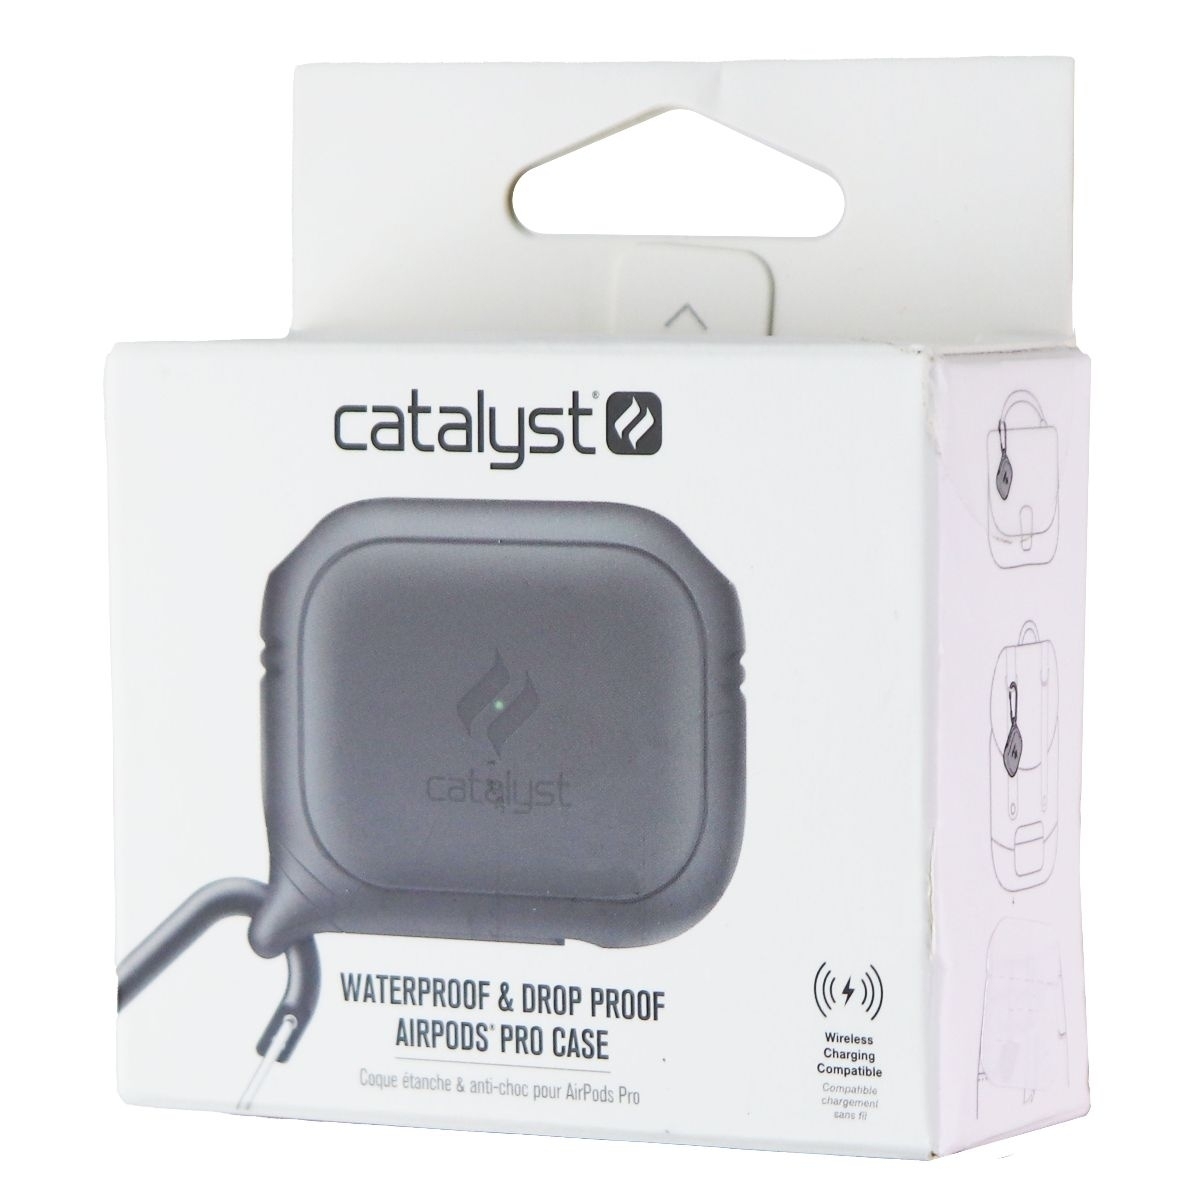 Catalyst Waterproof Case For AirPods Pro - Stealth Black